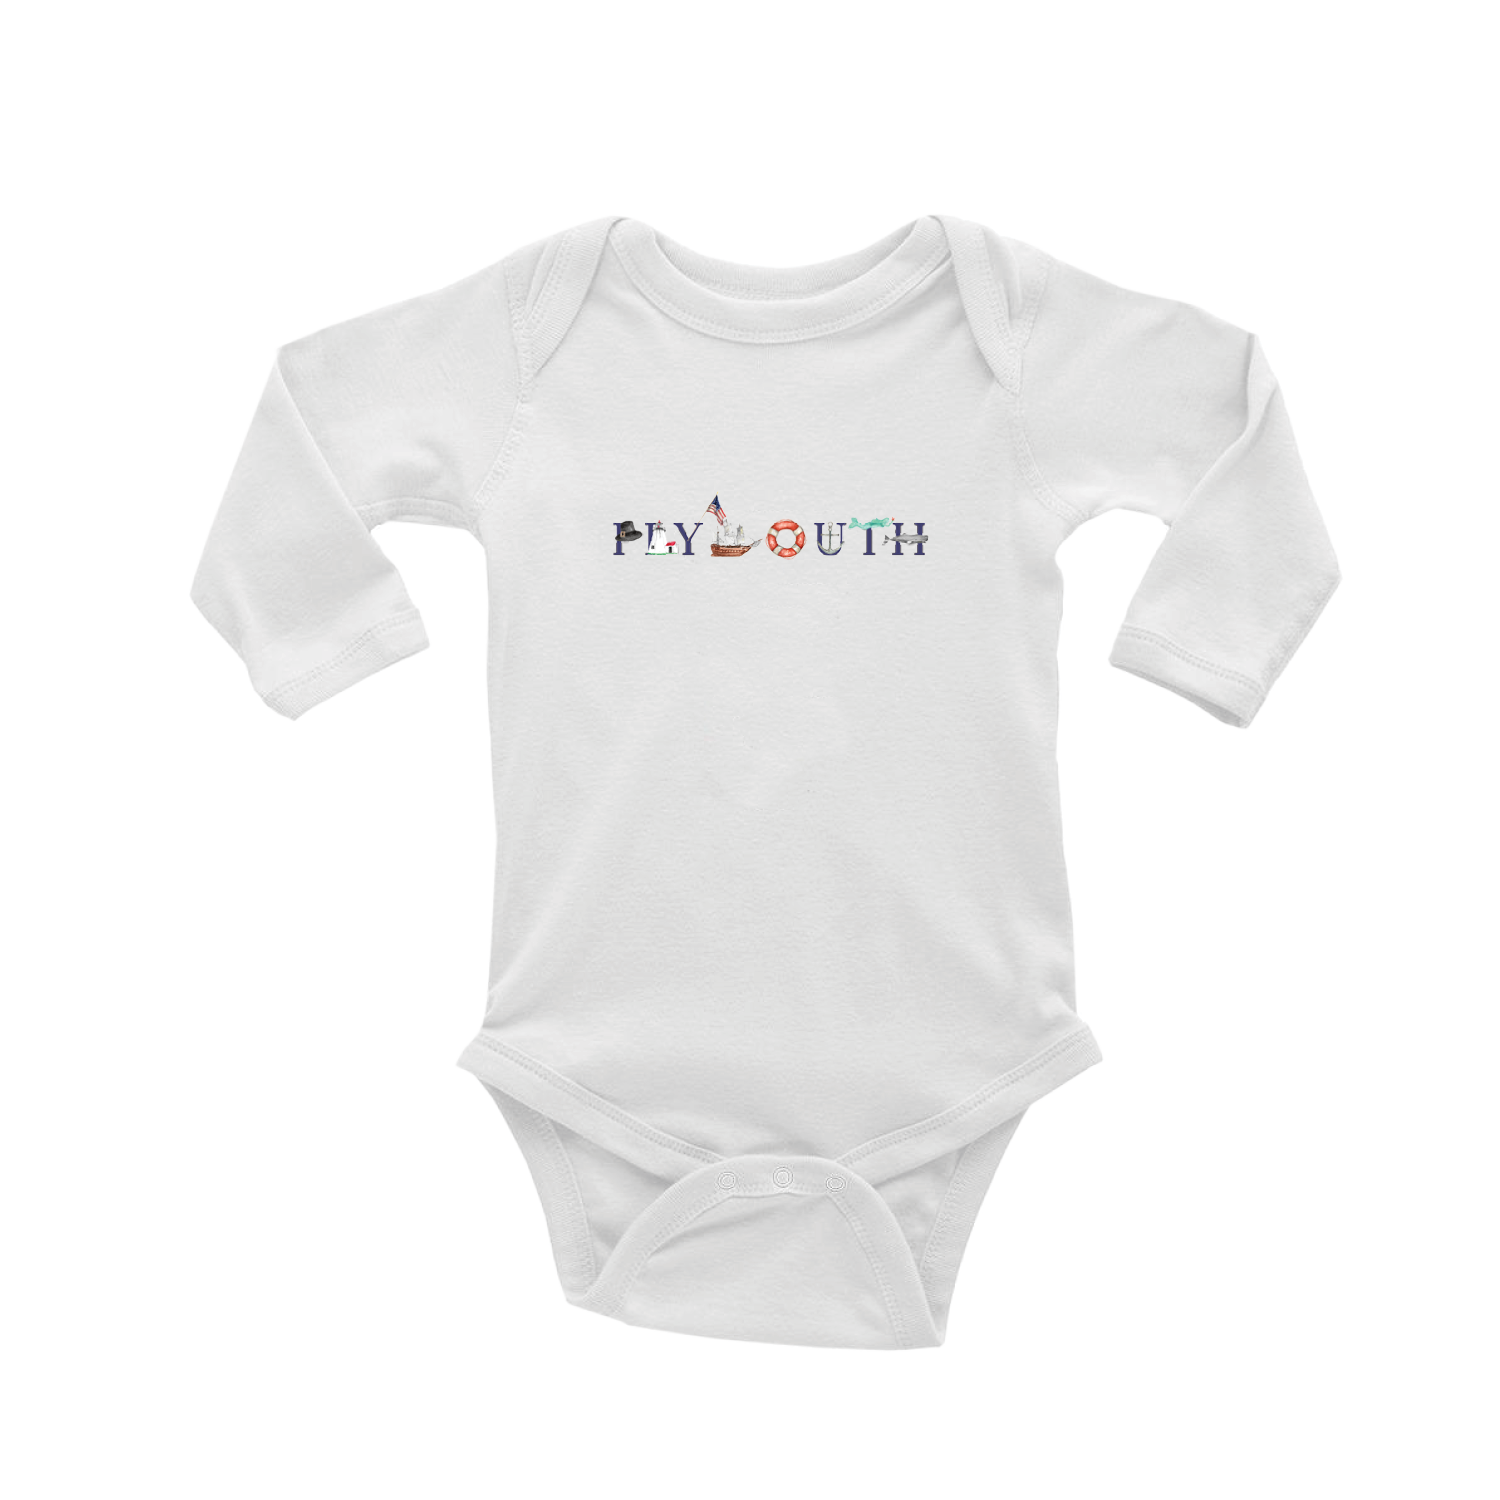 Plymouth baby snap up long sleeve